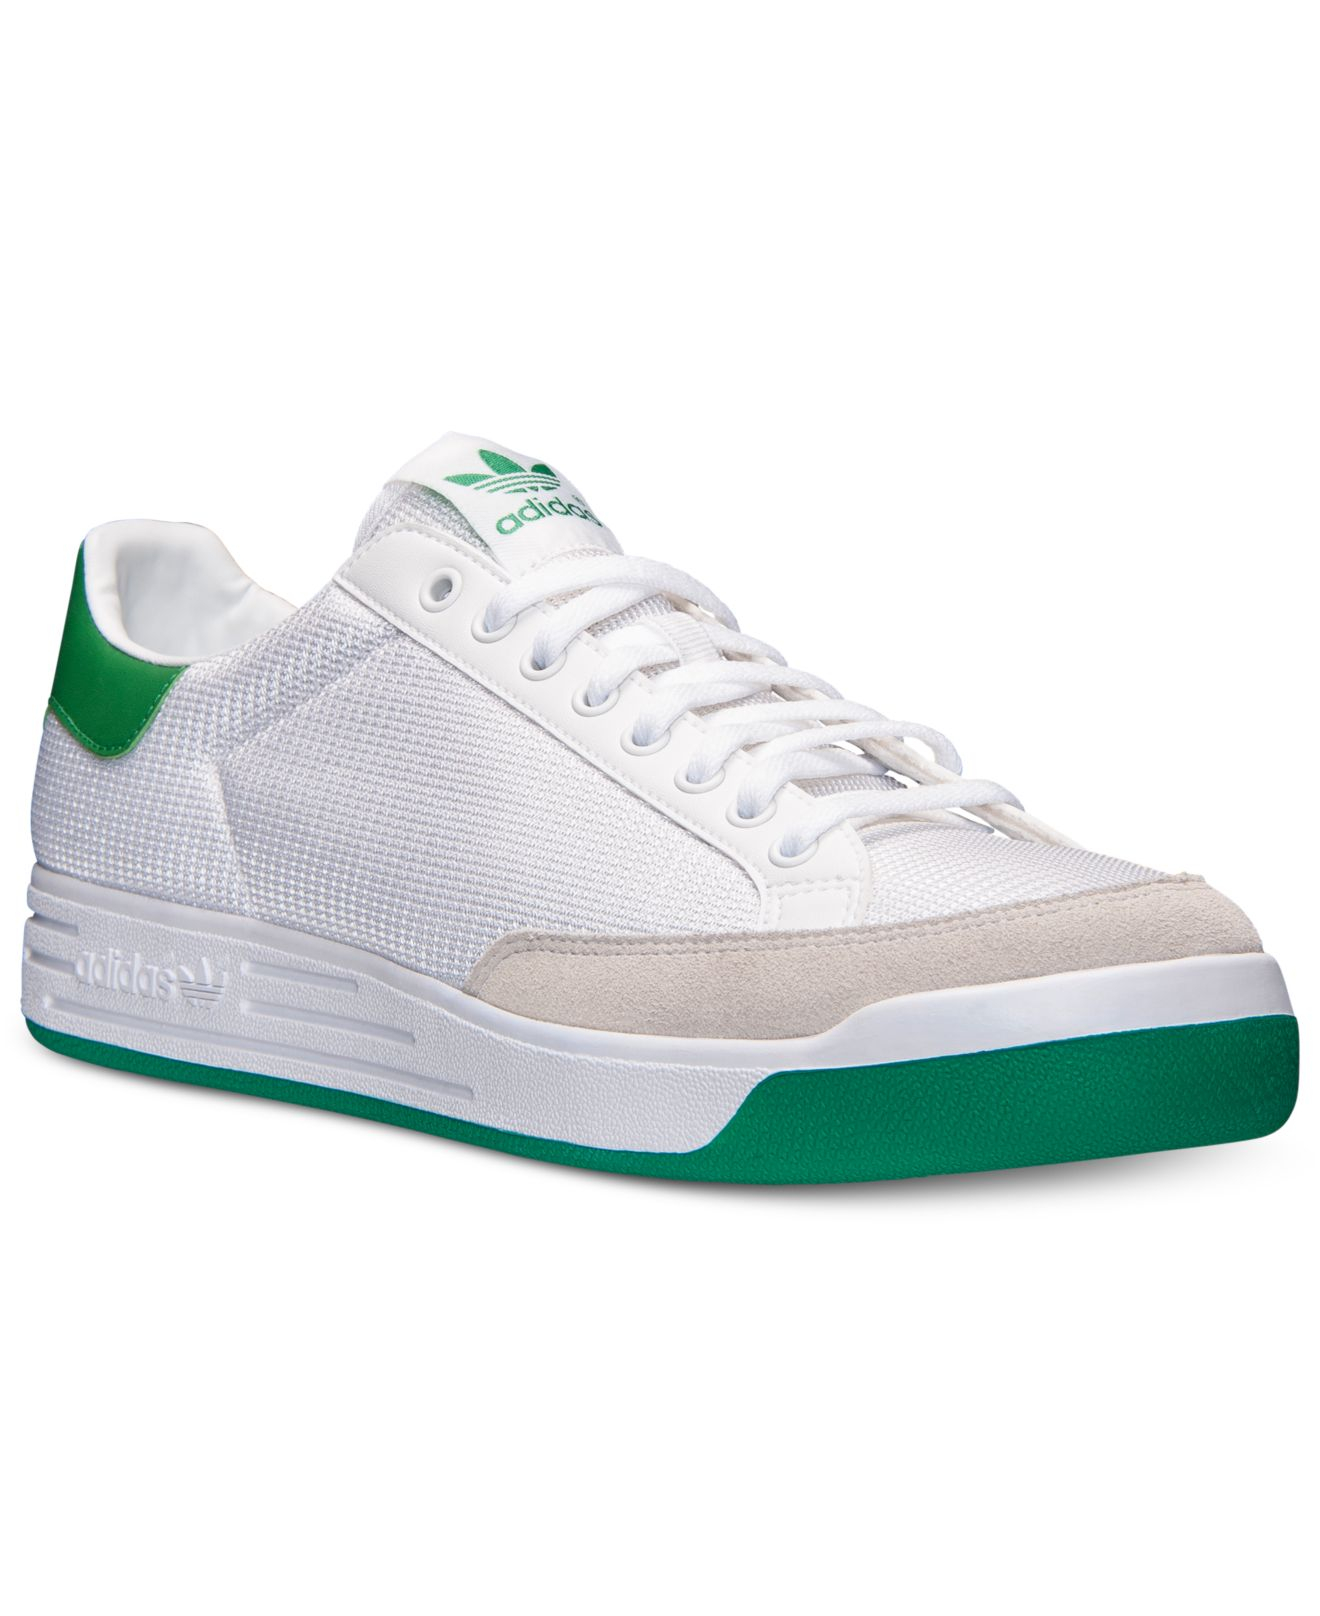 Lyst - Adidas Men'S Originals Rod Laver Casual Sneakers From Finish ...